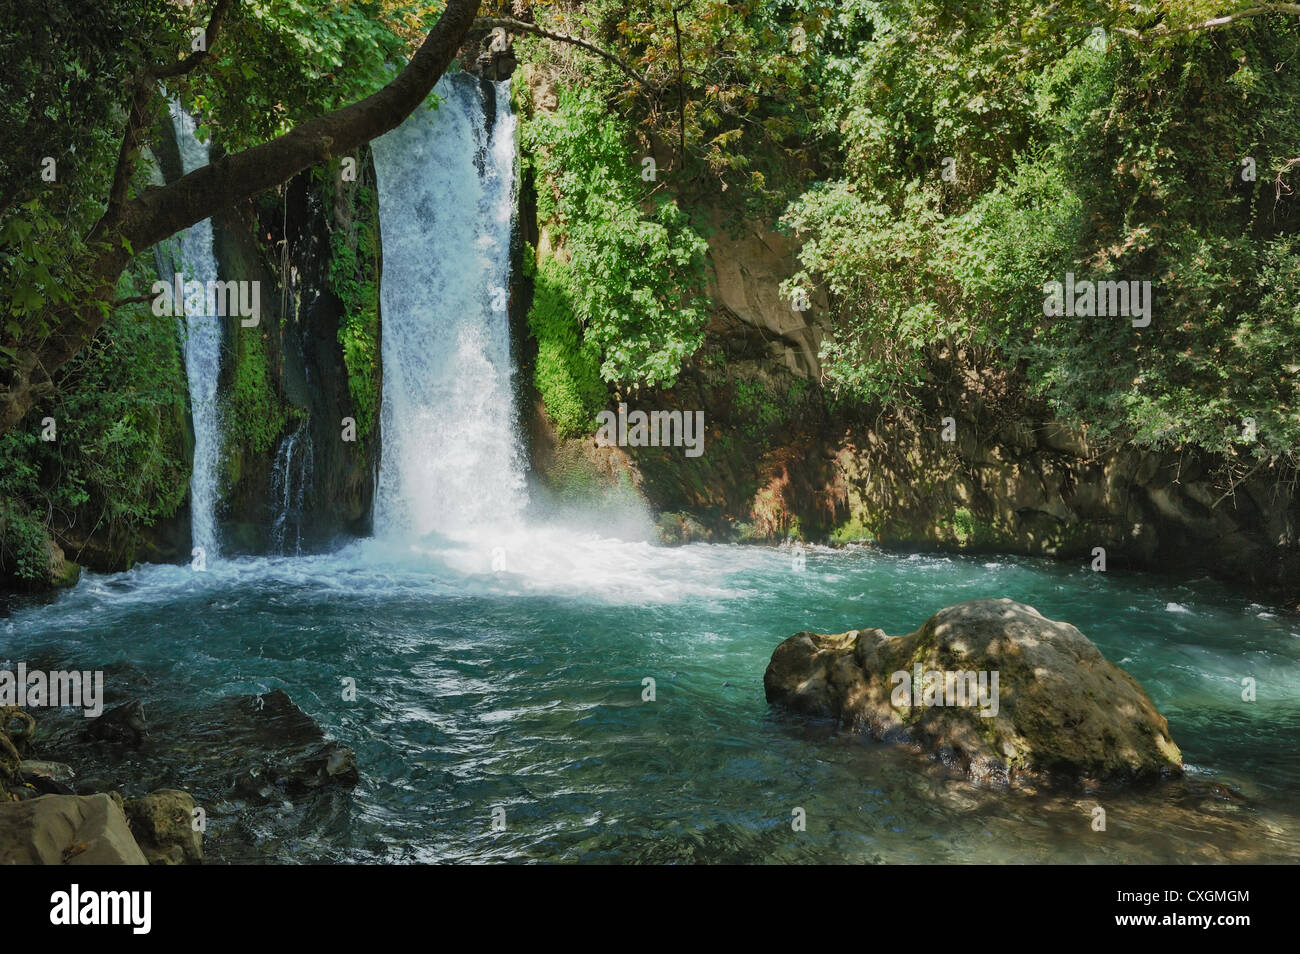 Waterfall in the Banias Nature Reserve in northern Israel Stock Photo